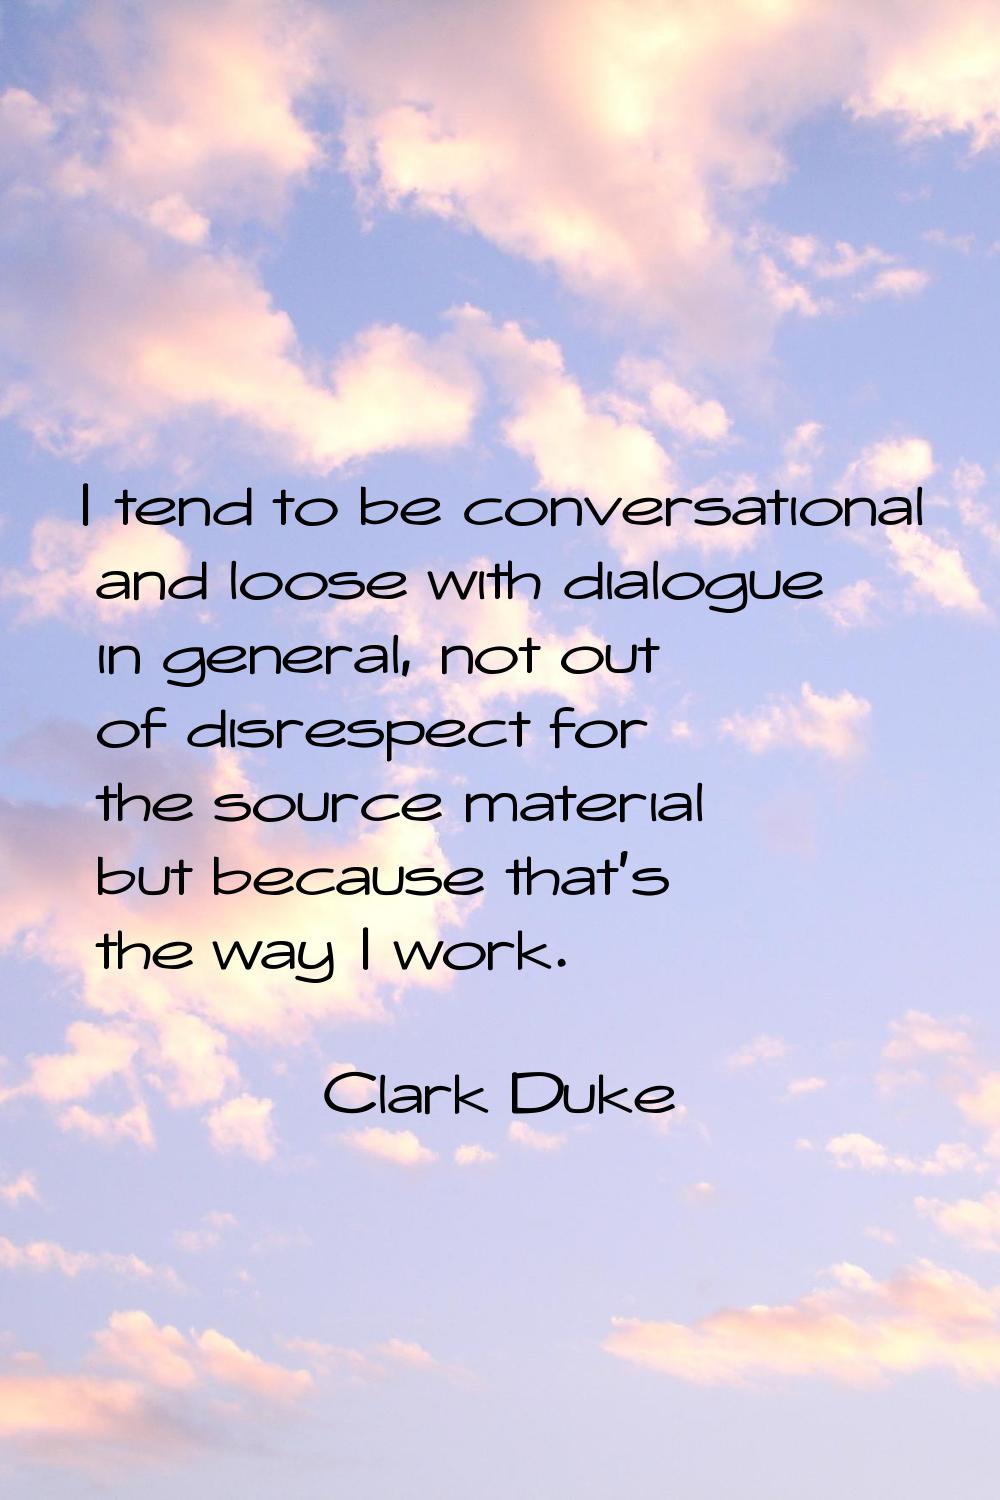 I tend to be conversational and loose with dialogue in general, not out of disrespect for the sourc